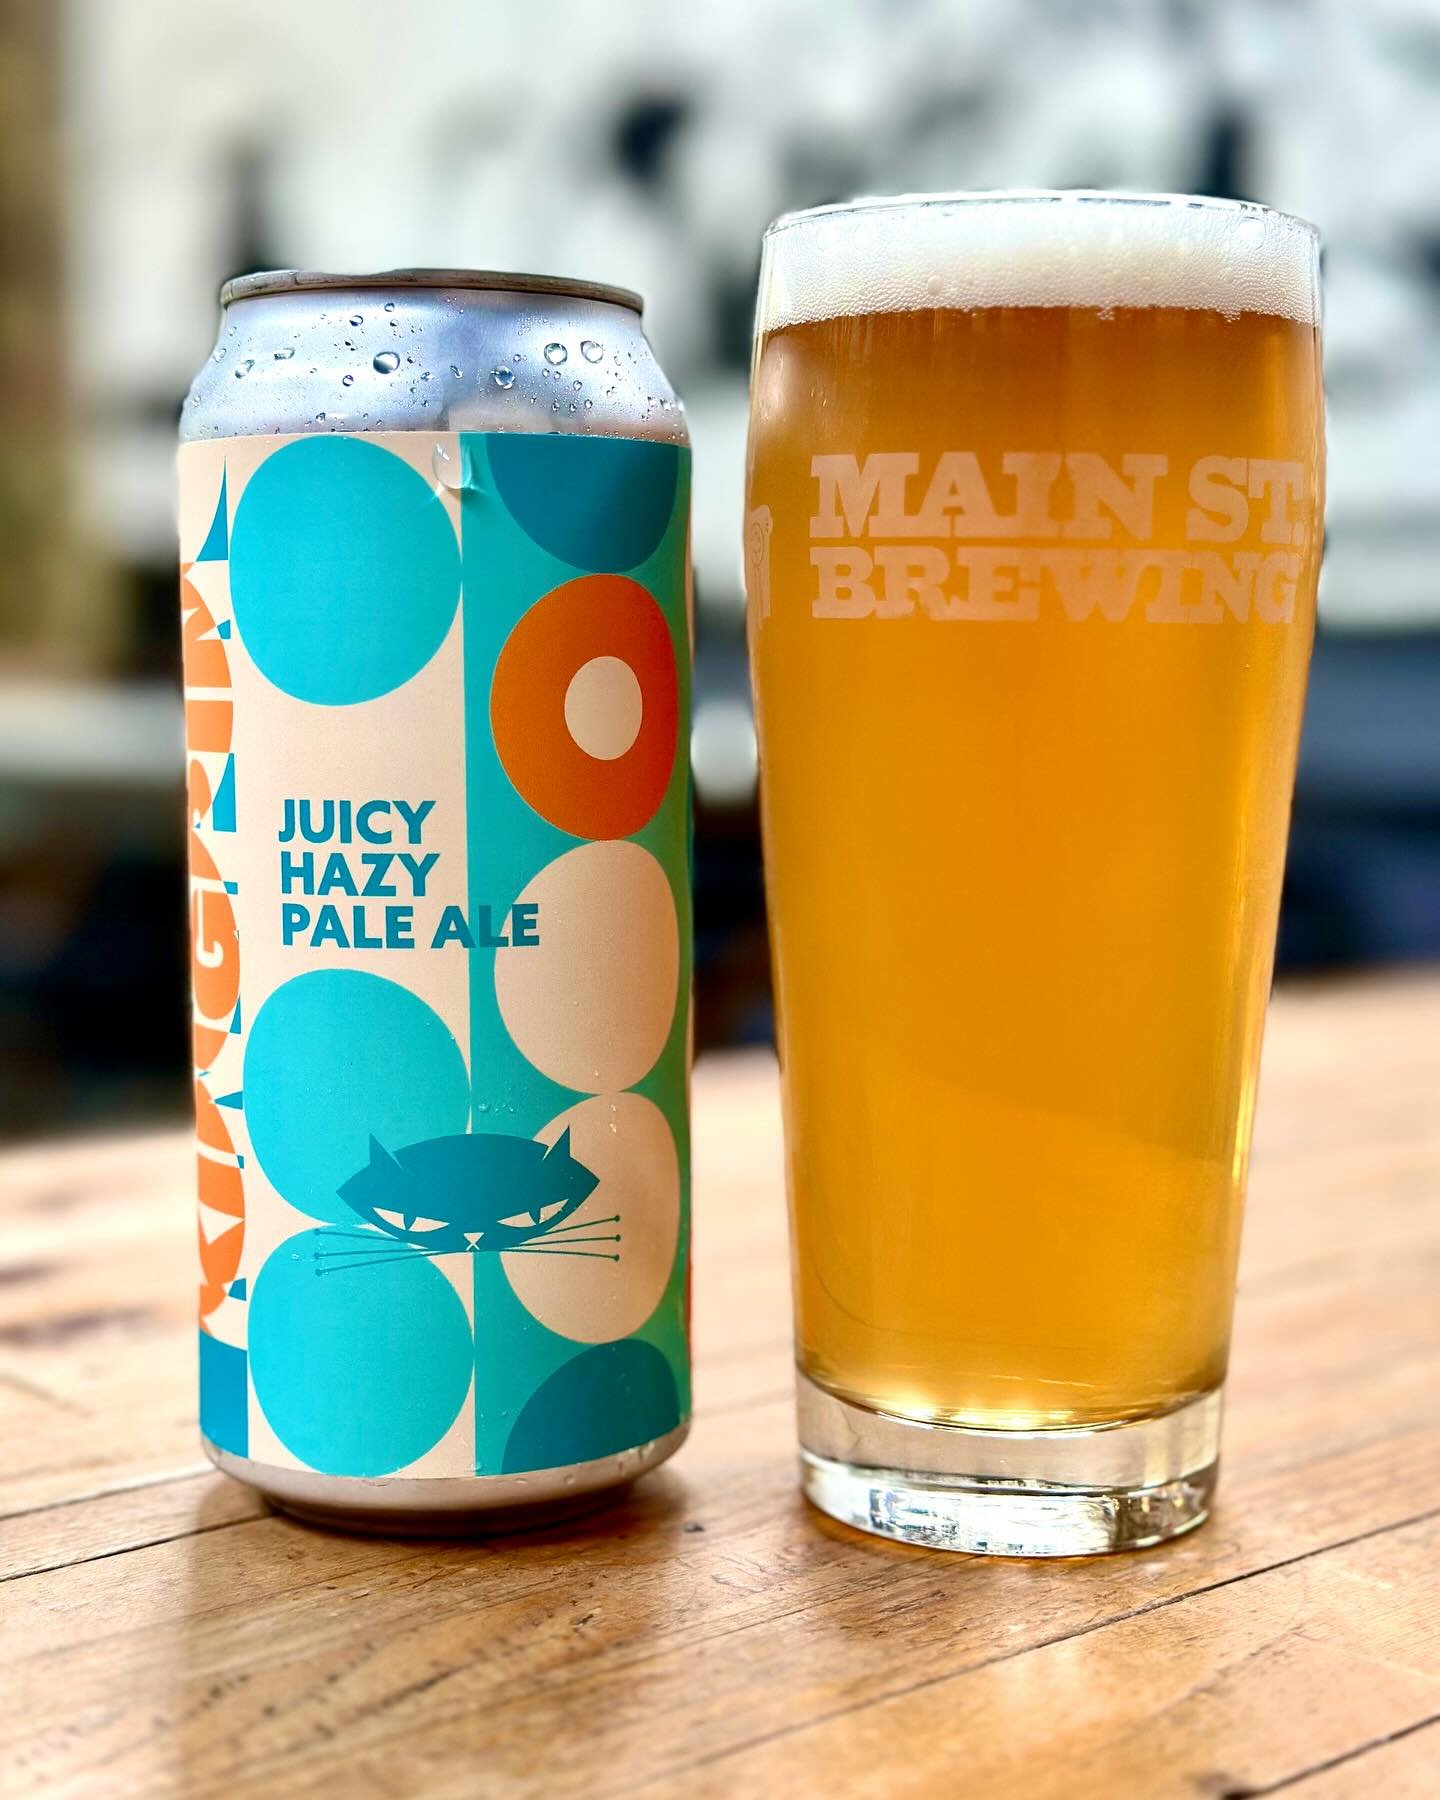 THE KING IS DEAD. LONG LIVE THE KING!

Our flagship Kingpin Hazy Pale Ale. All new look. Same great taste. Coming your way soon.

Always available on tap in our tasting room, to go in 355-mL six packs and 473-mL singles and four-packs from our retail